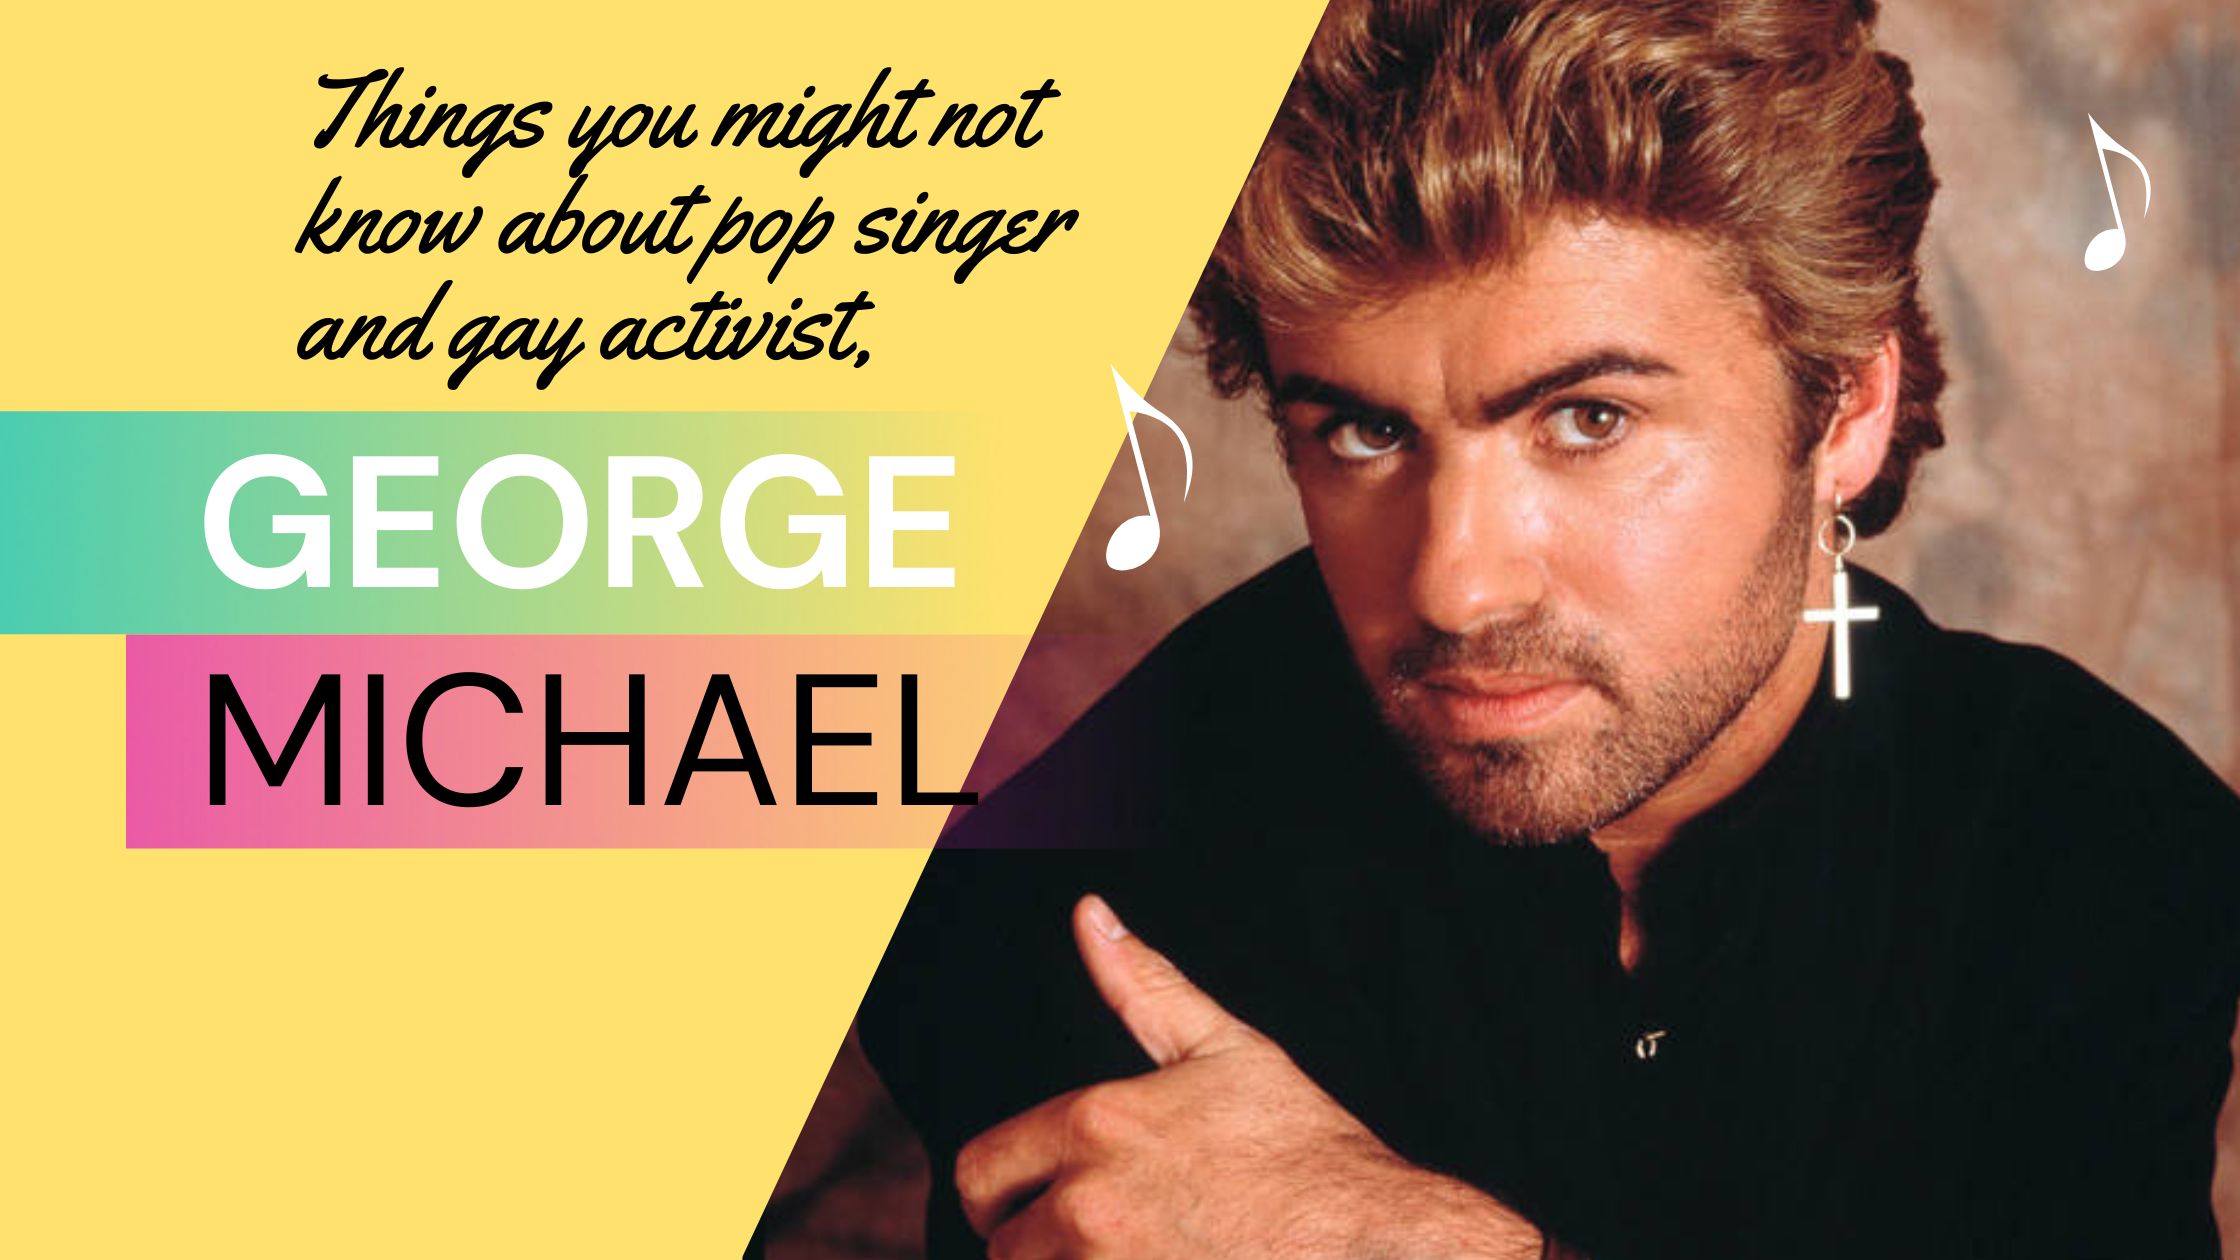 Things you might not know about pop singer and gay activist, George Michael